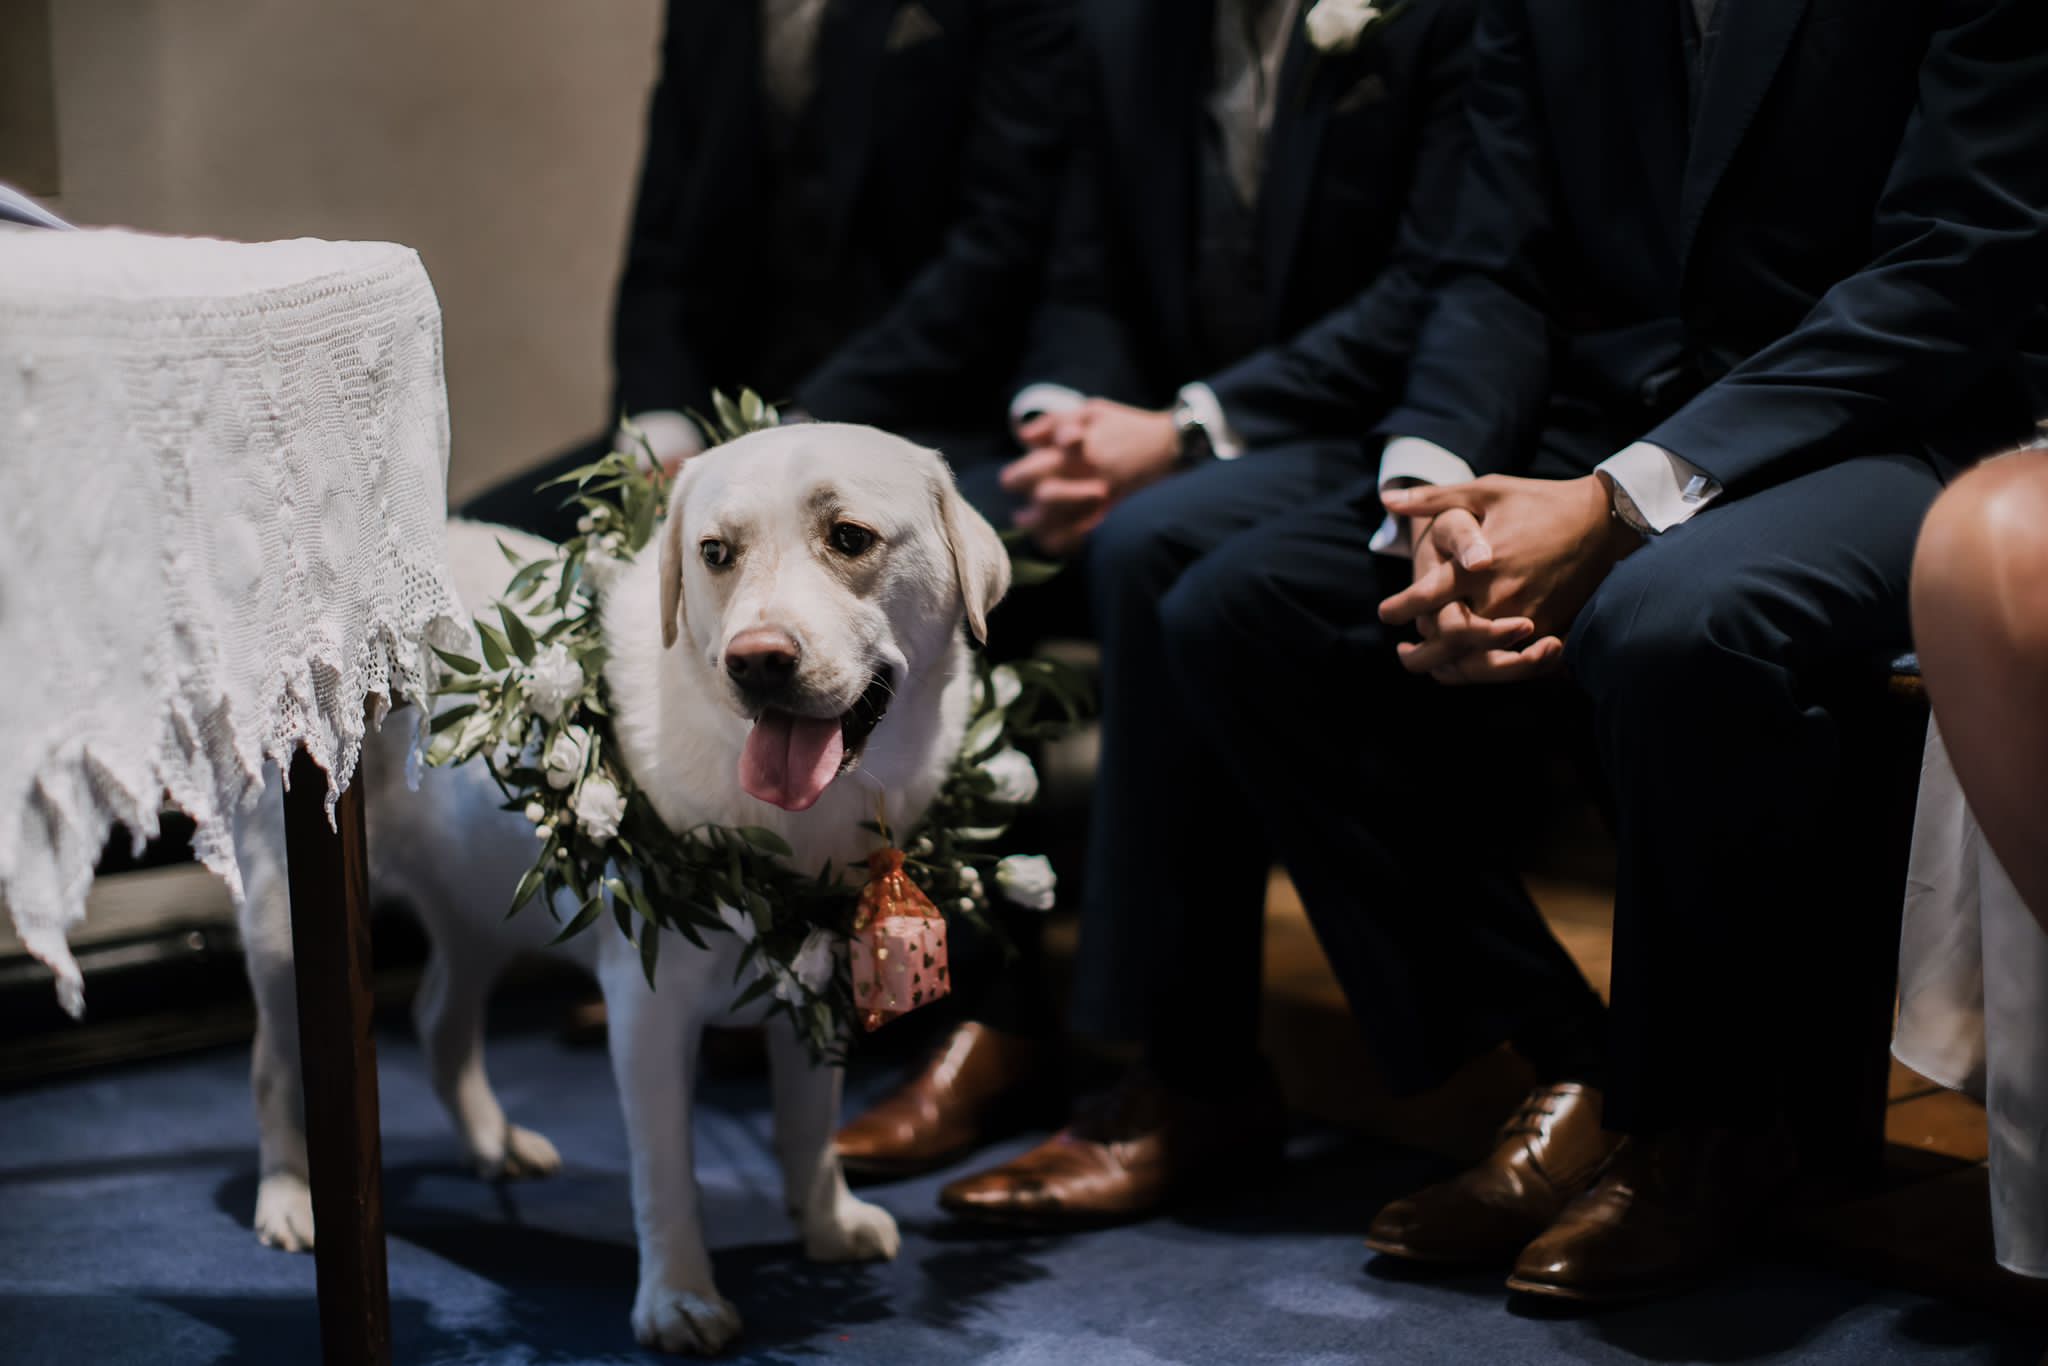 What are some considerations when choosing a bridal outfit for a dog?